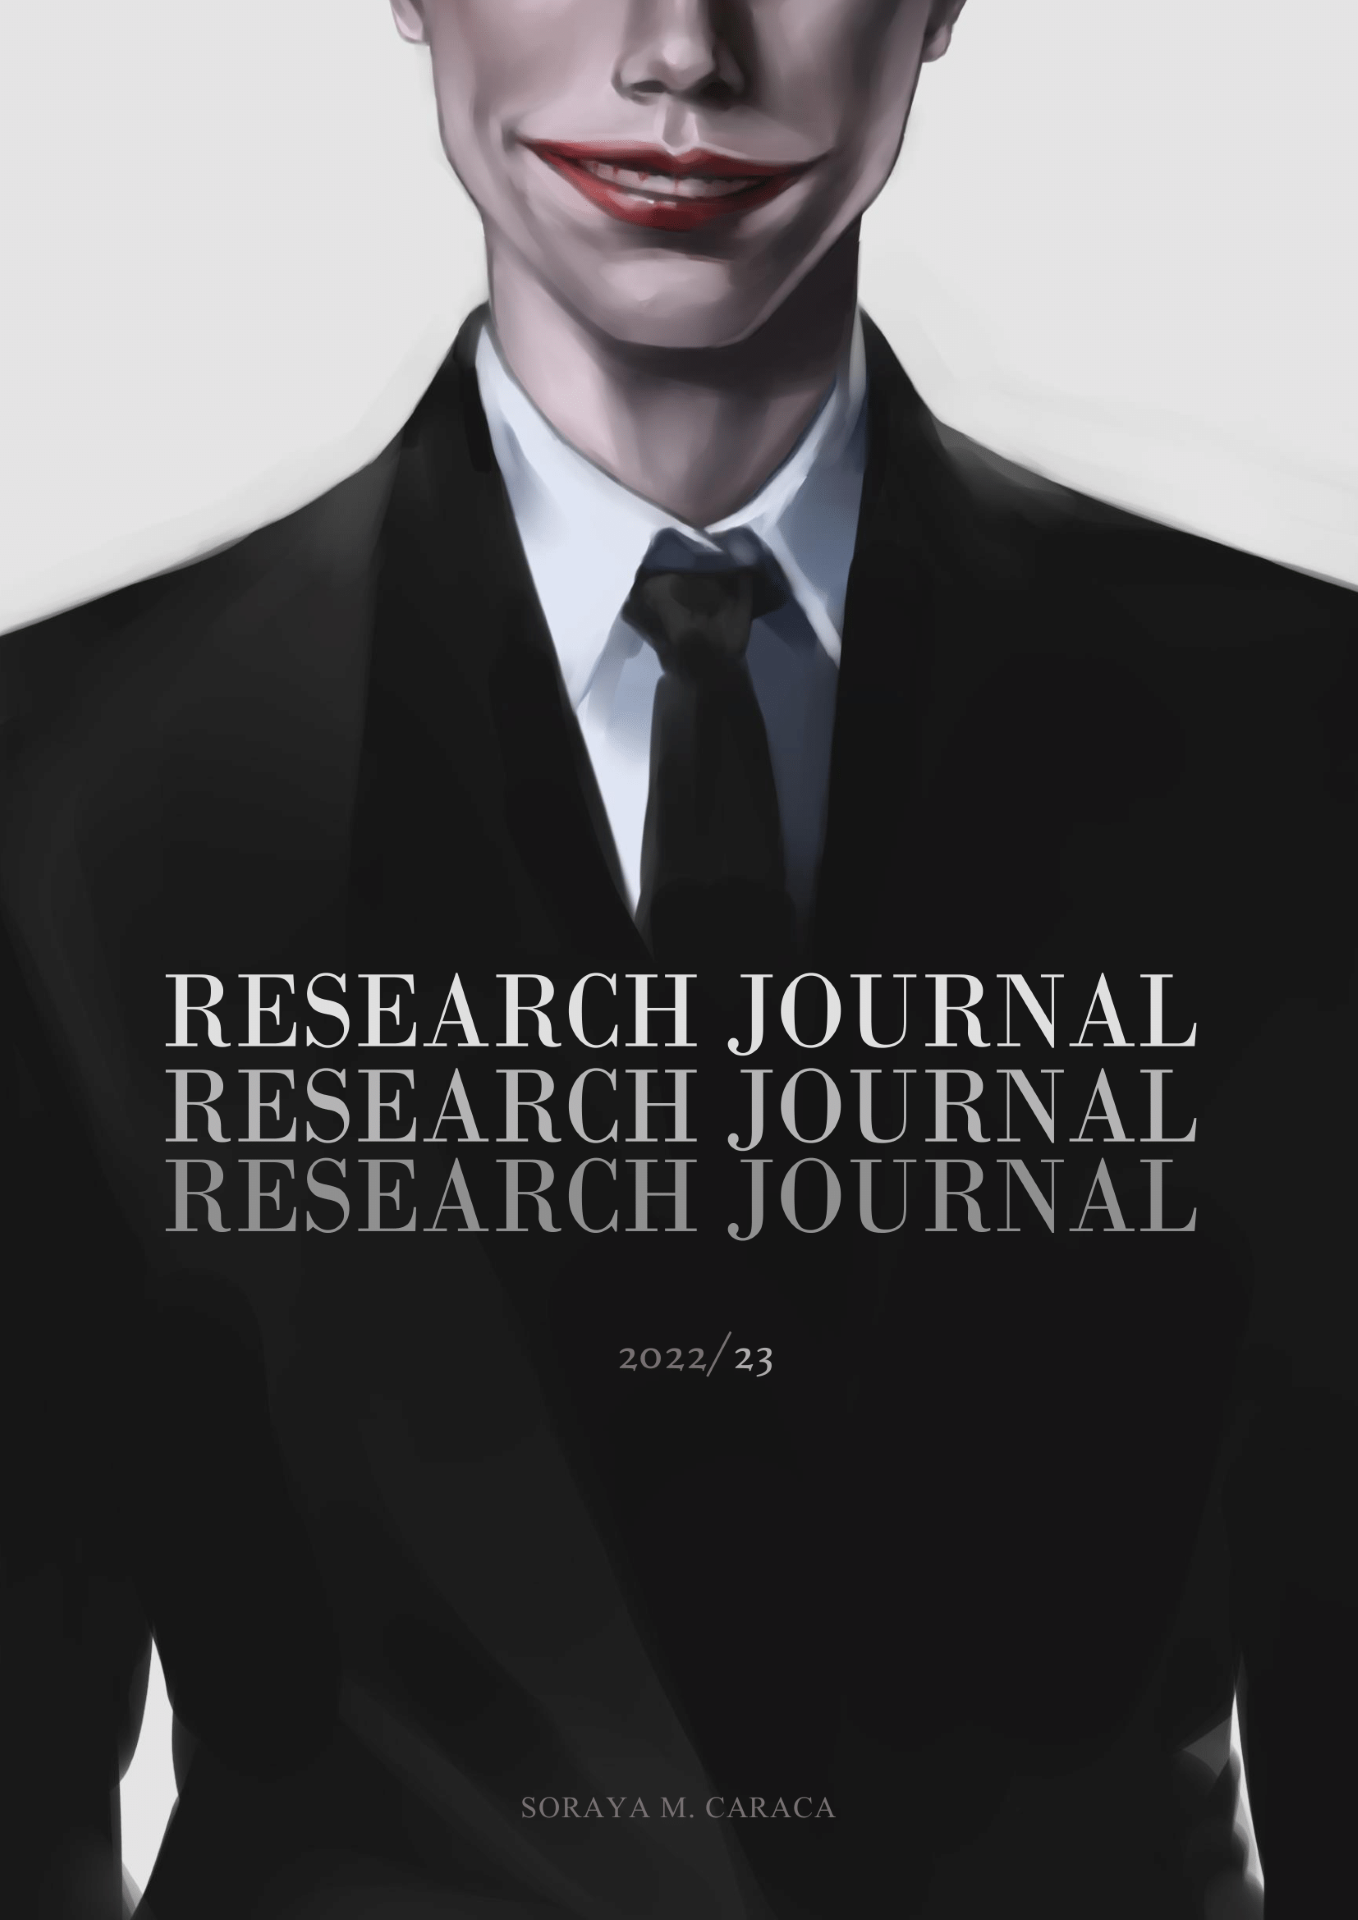 "Research Journal with Simon Atkinson" Digital painting